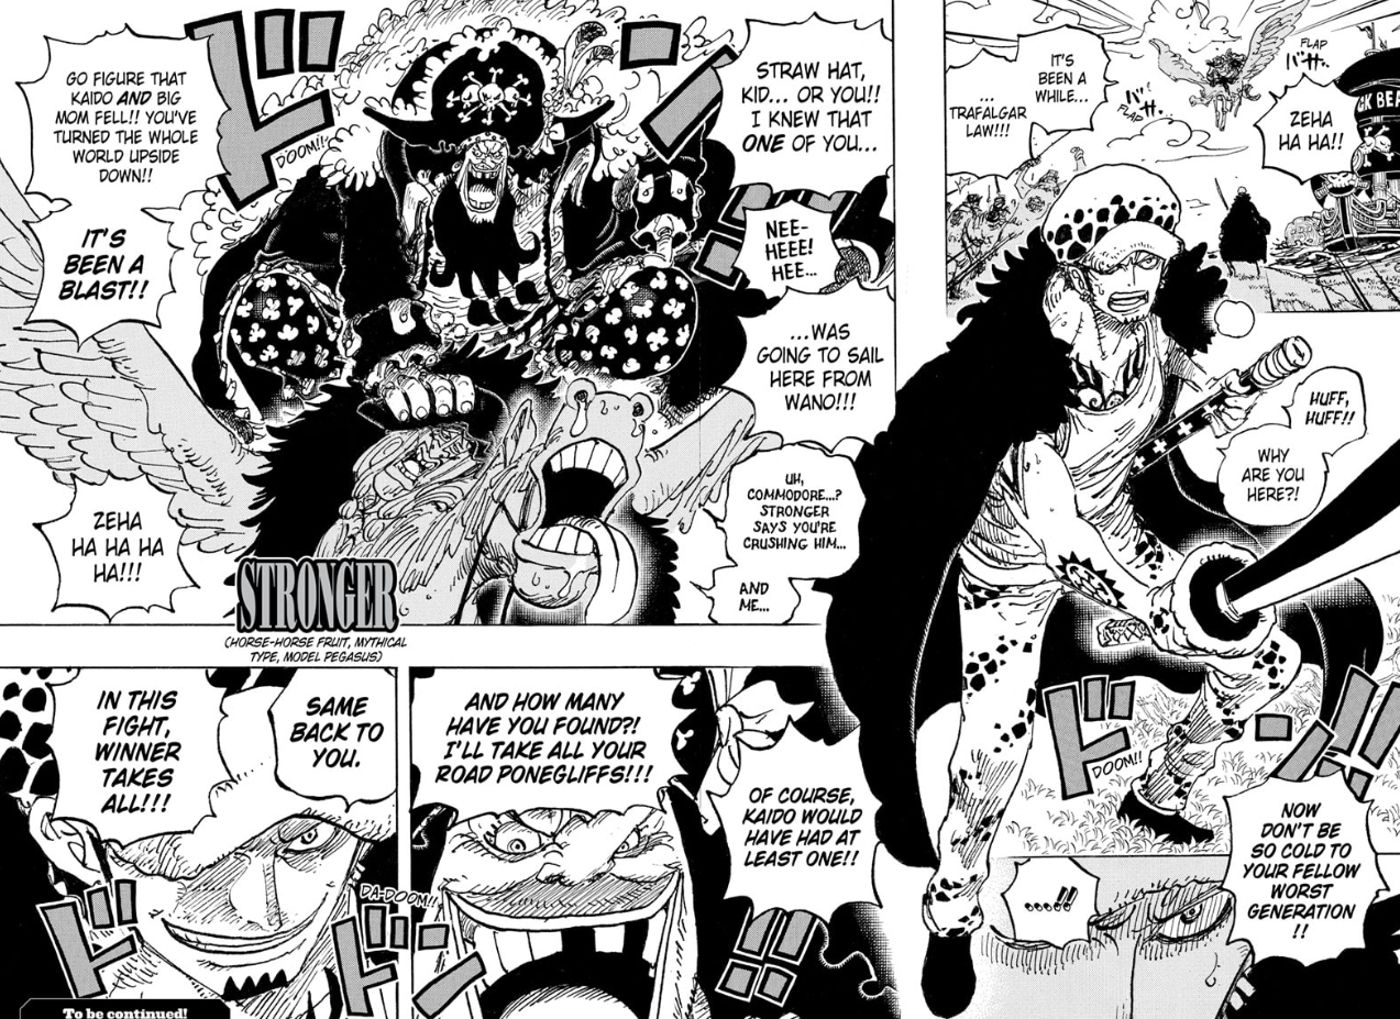 4 One Piece characters that Trafalgar Law can beat (and 4 he cannot)